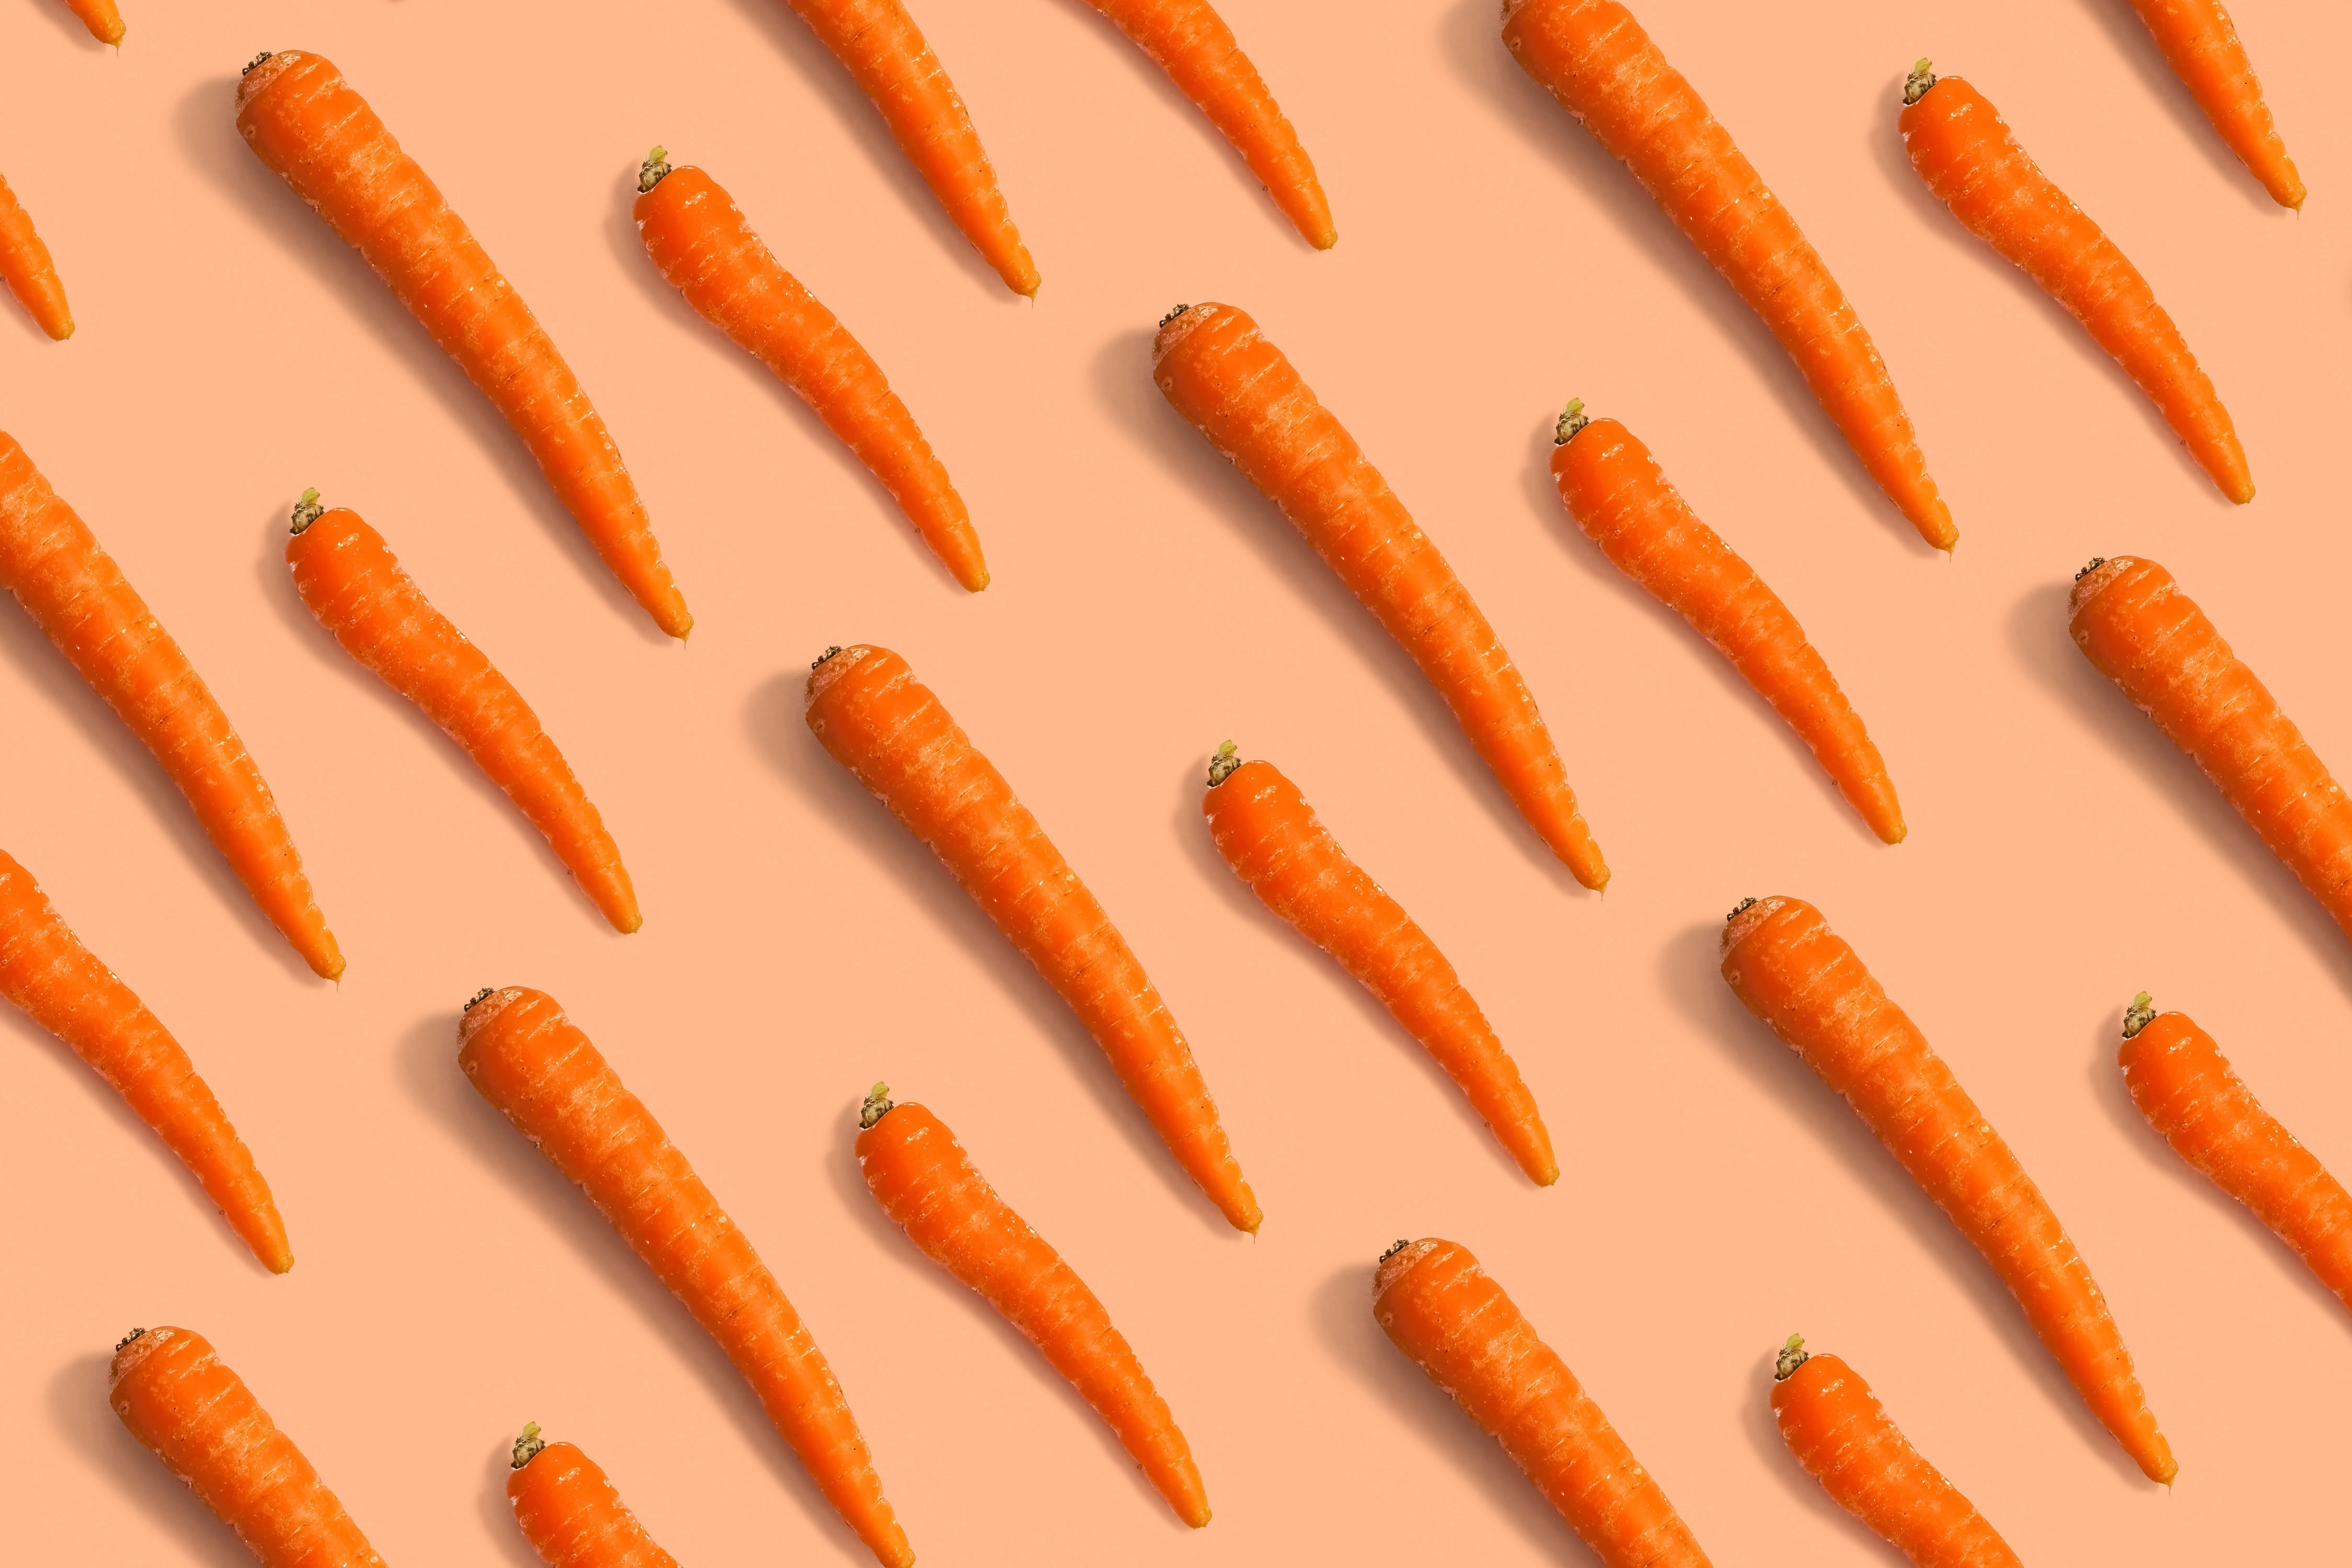 Are Carrots Actually Good for Your Eyes?